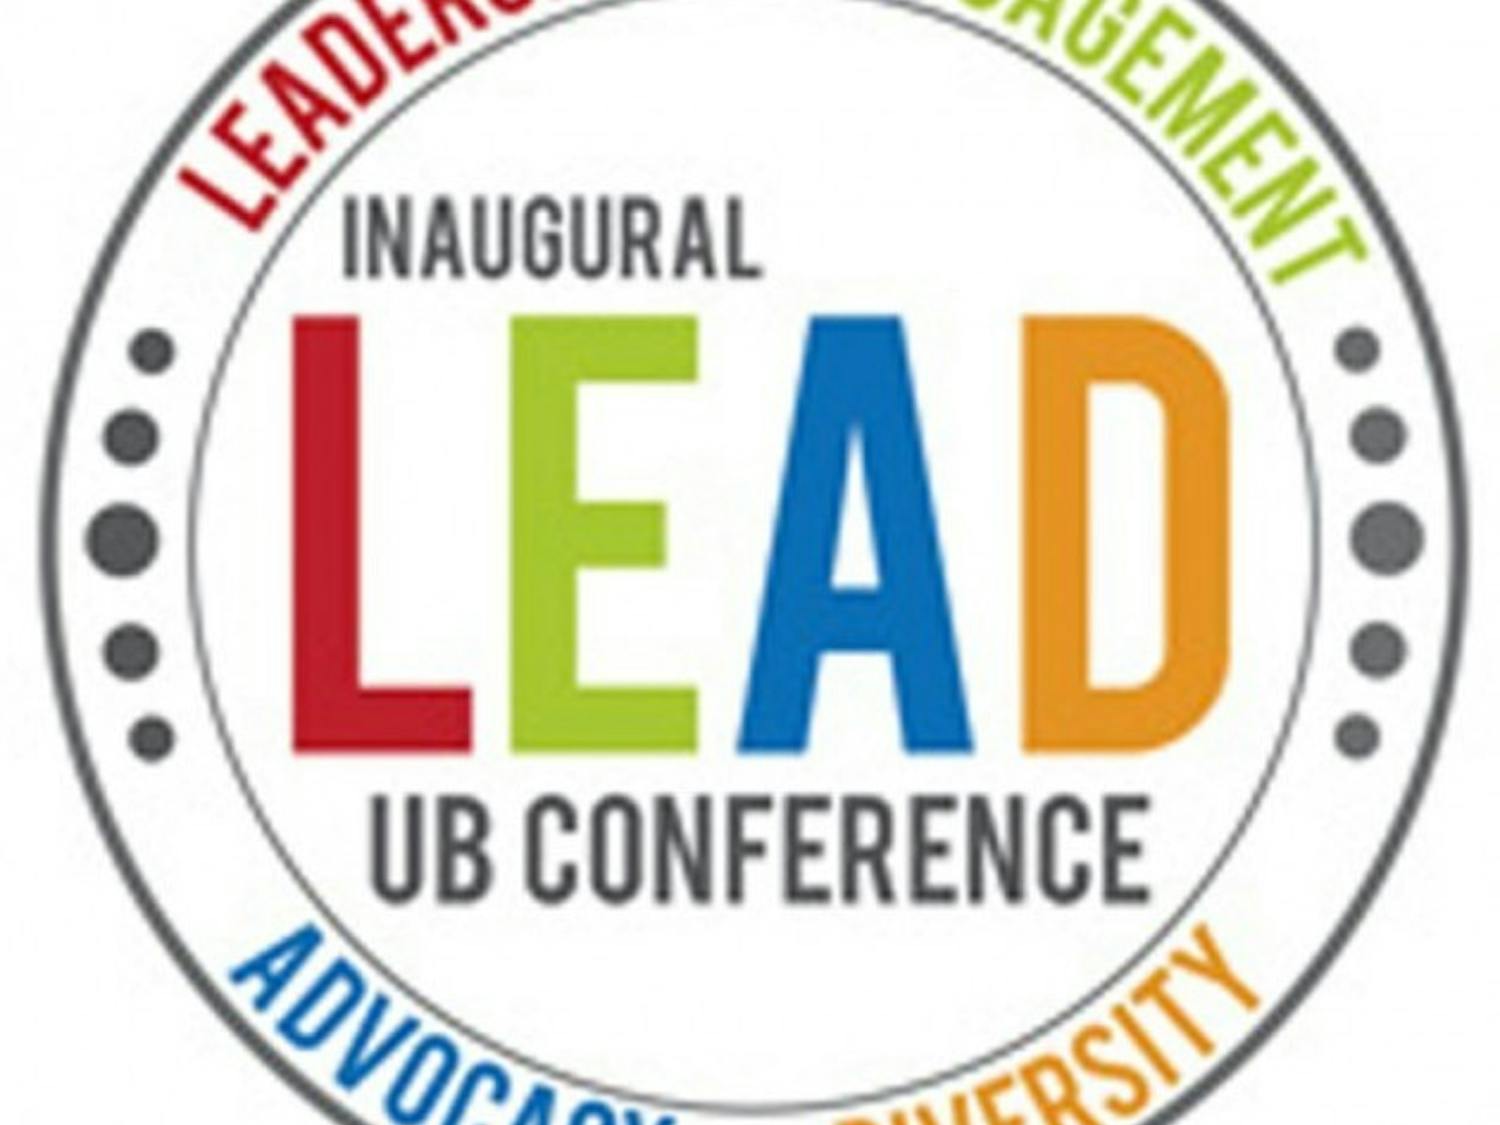 On Saturday, UB had its first LEAD conference, which was jointly hosted by the
Center for Student Leadership and Engagement and the Intercultural
and Diversity Center. The event held three speakers that talked about
the skills needed for a 21st century leader.
Courtesy of LEAD UB Conference